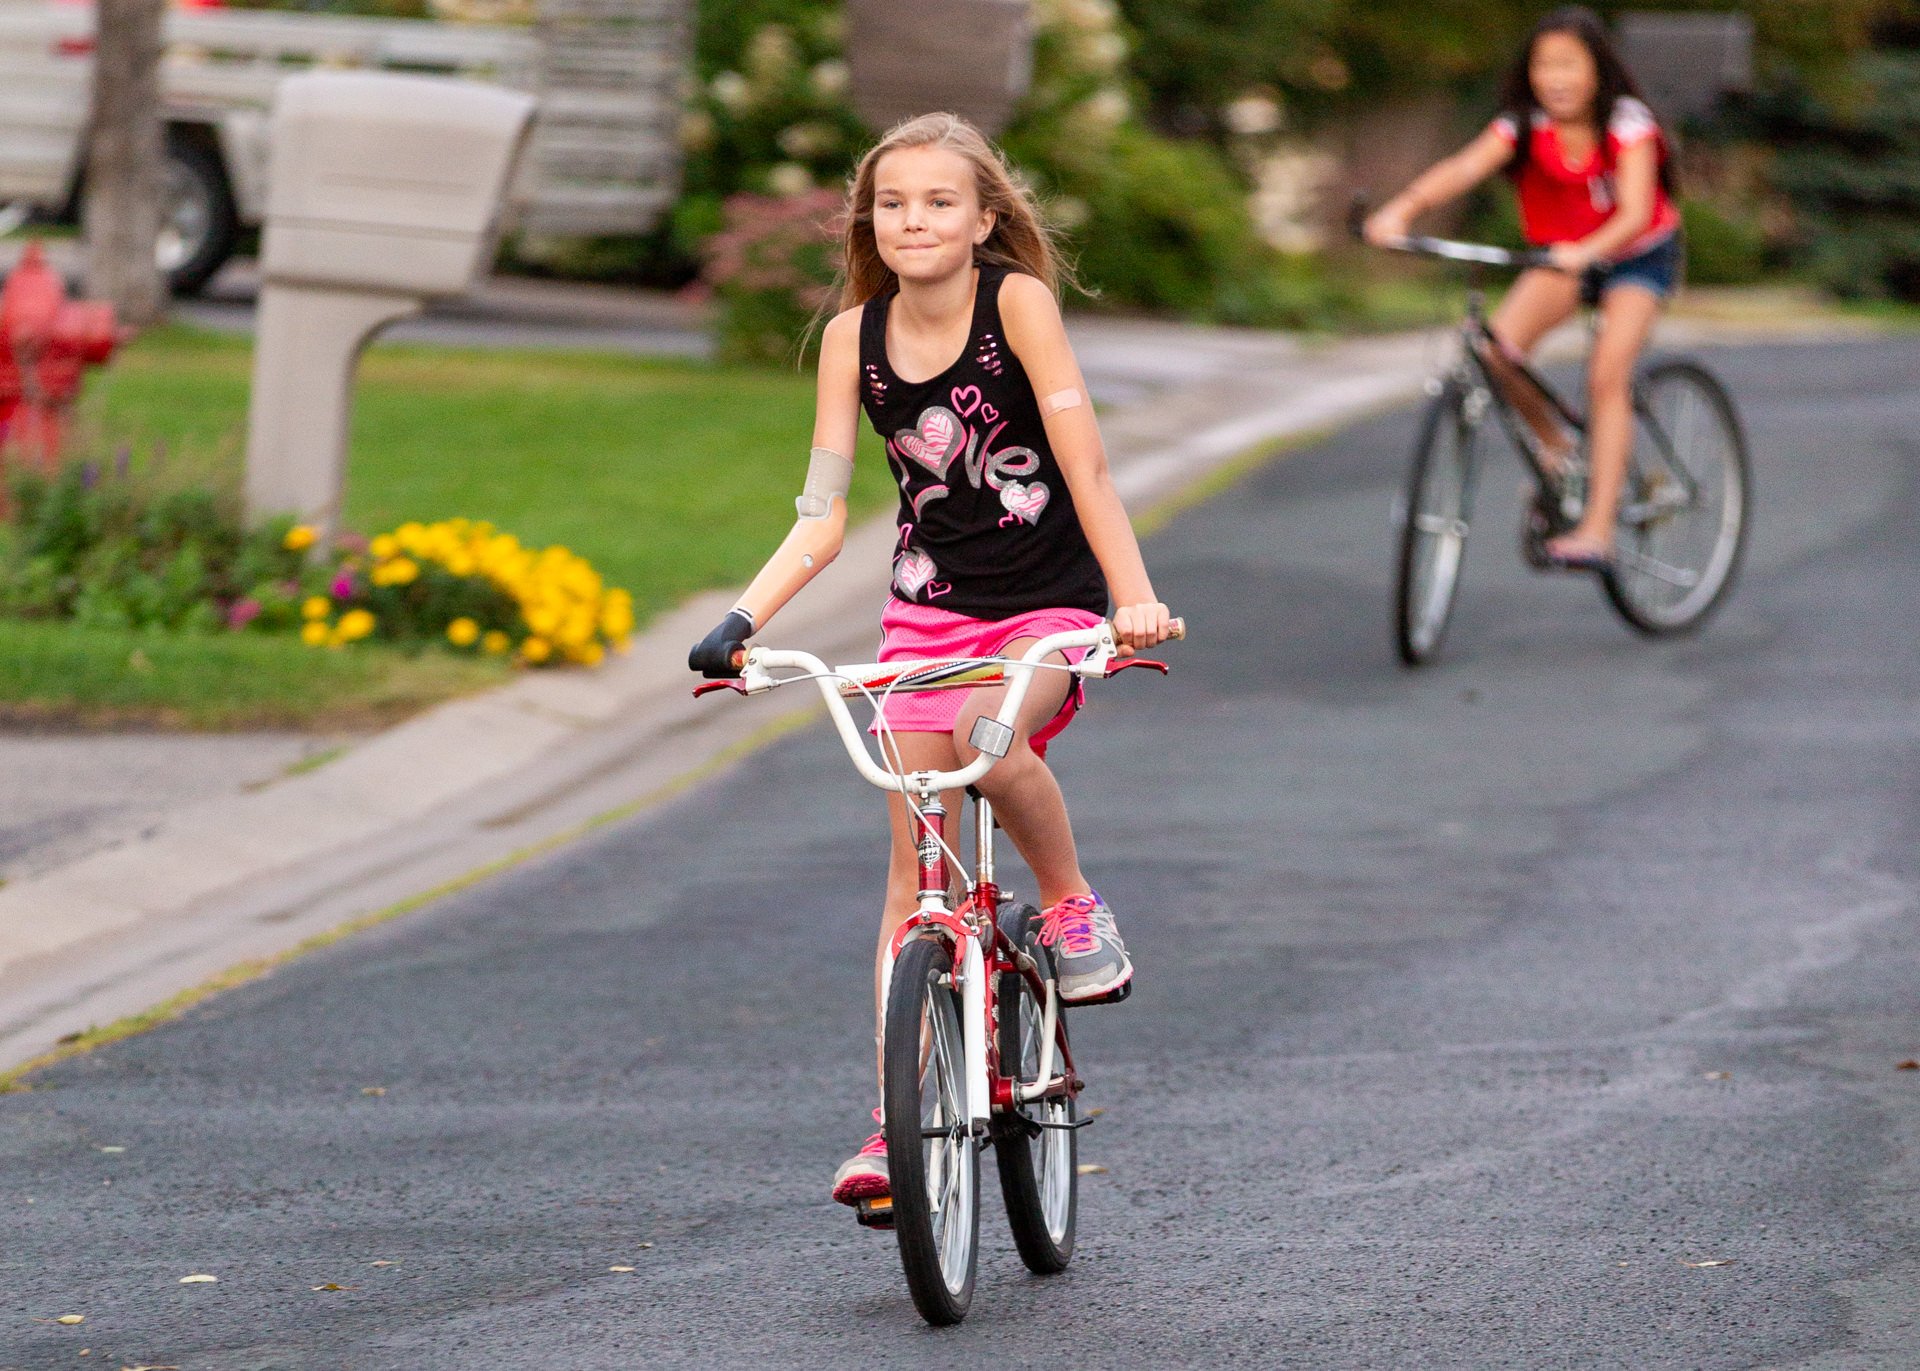 Congenital pediatric patient Amber Peterson uses her activity-specific prosthesis to ride bikes with friends.